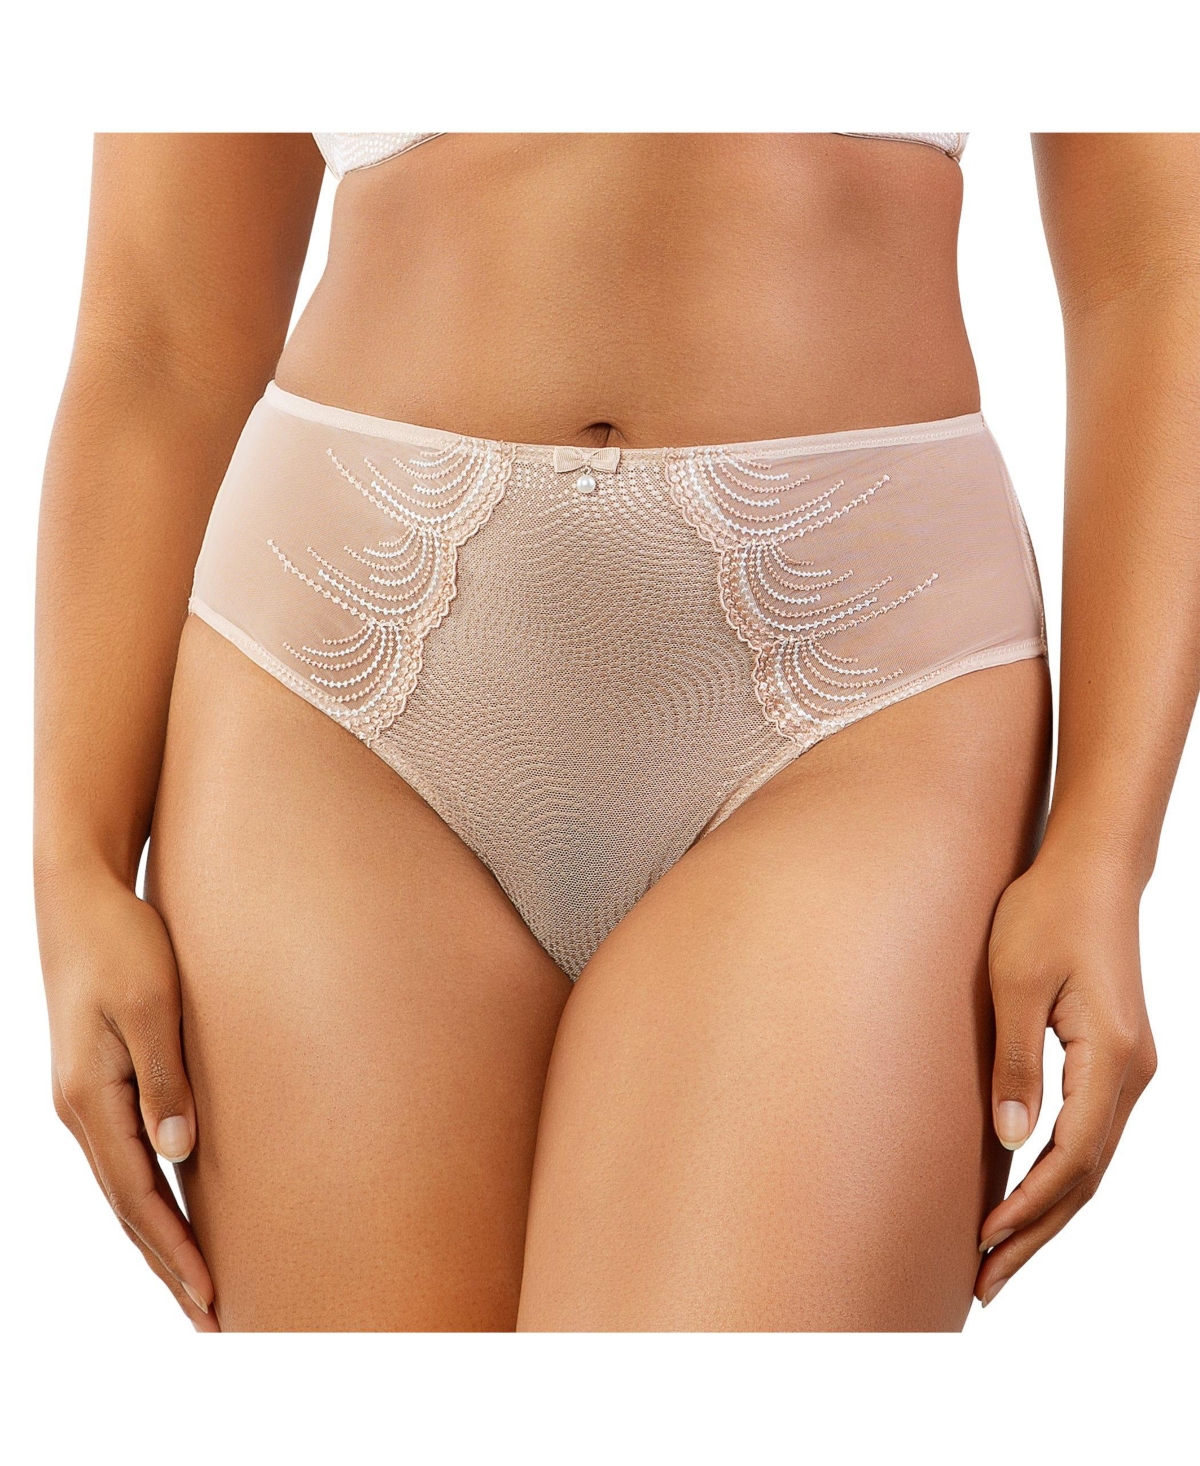 Women's French Cut Panty - Cameo rose